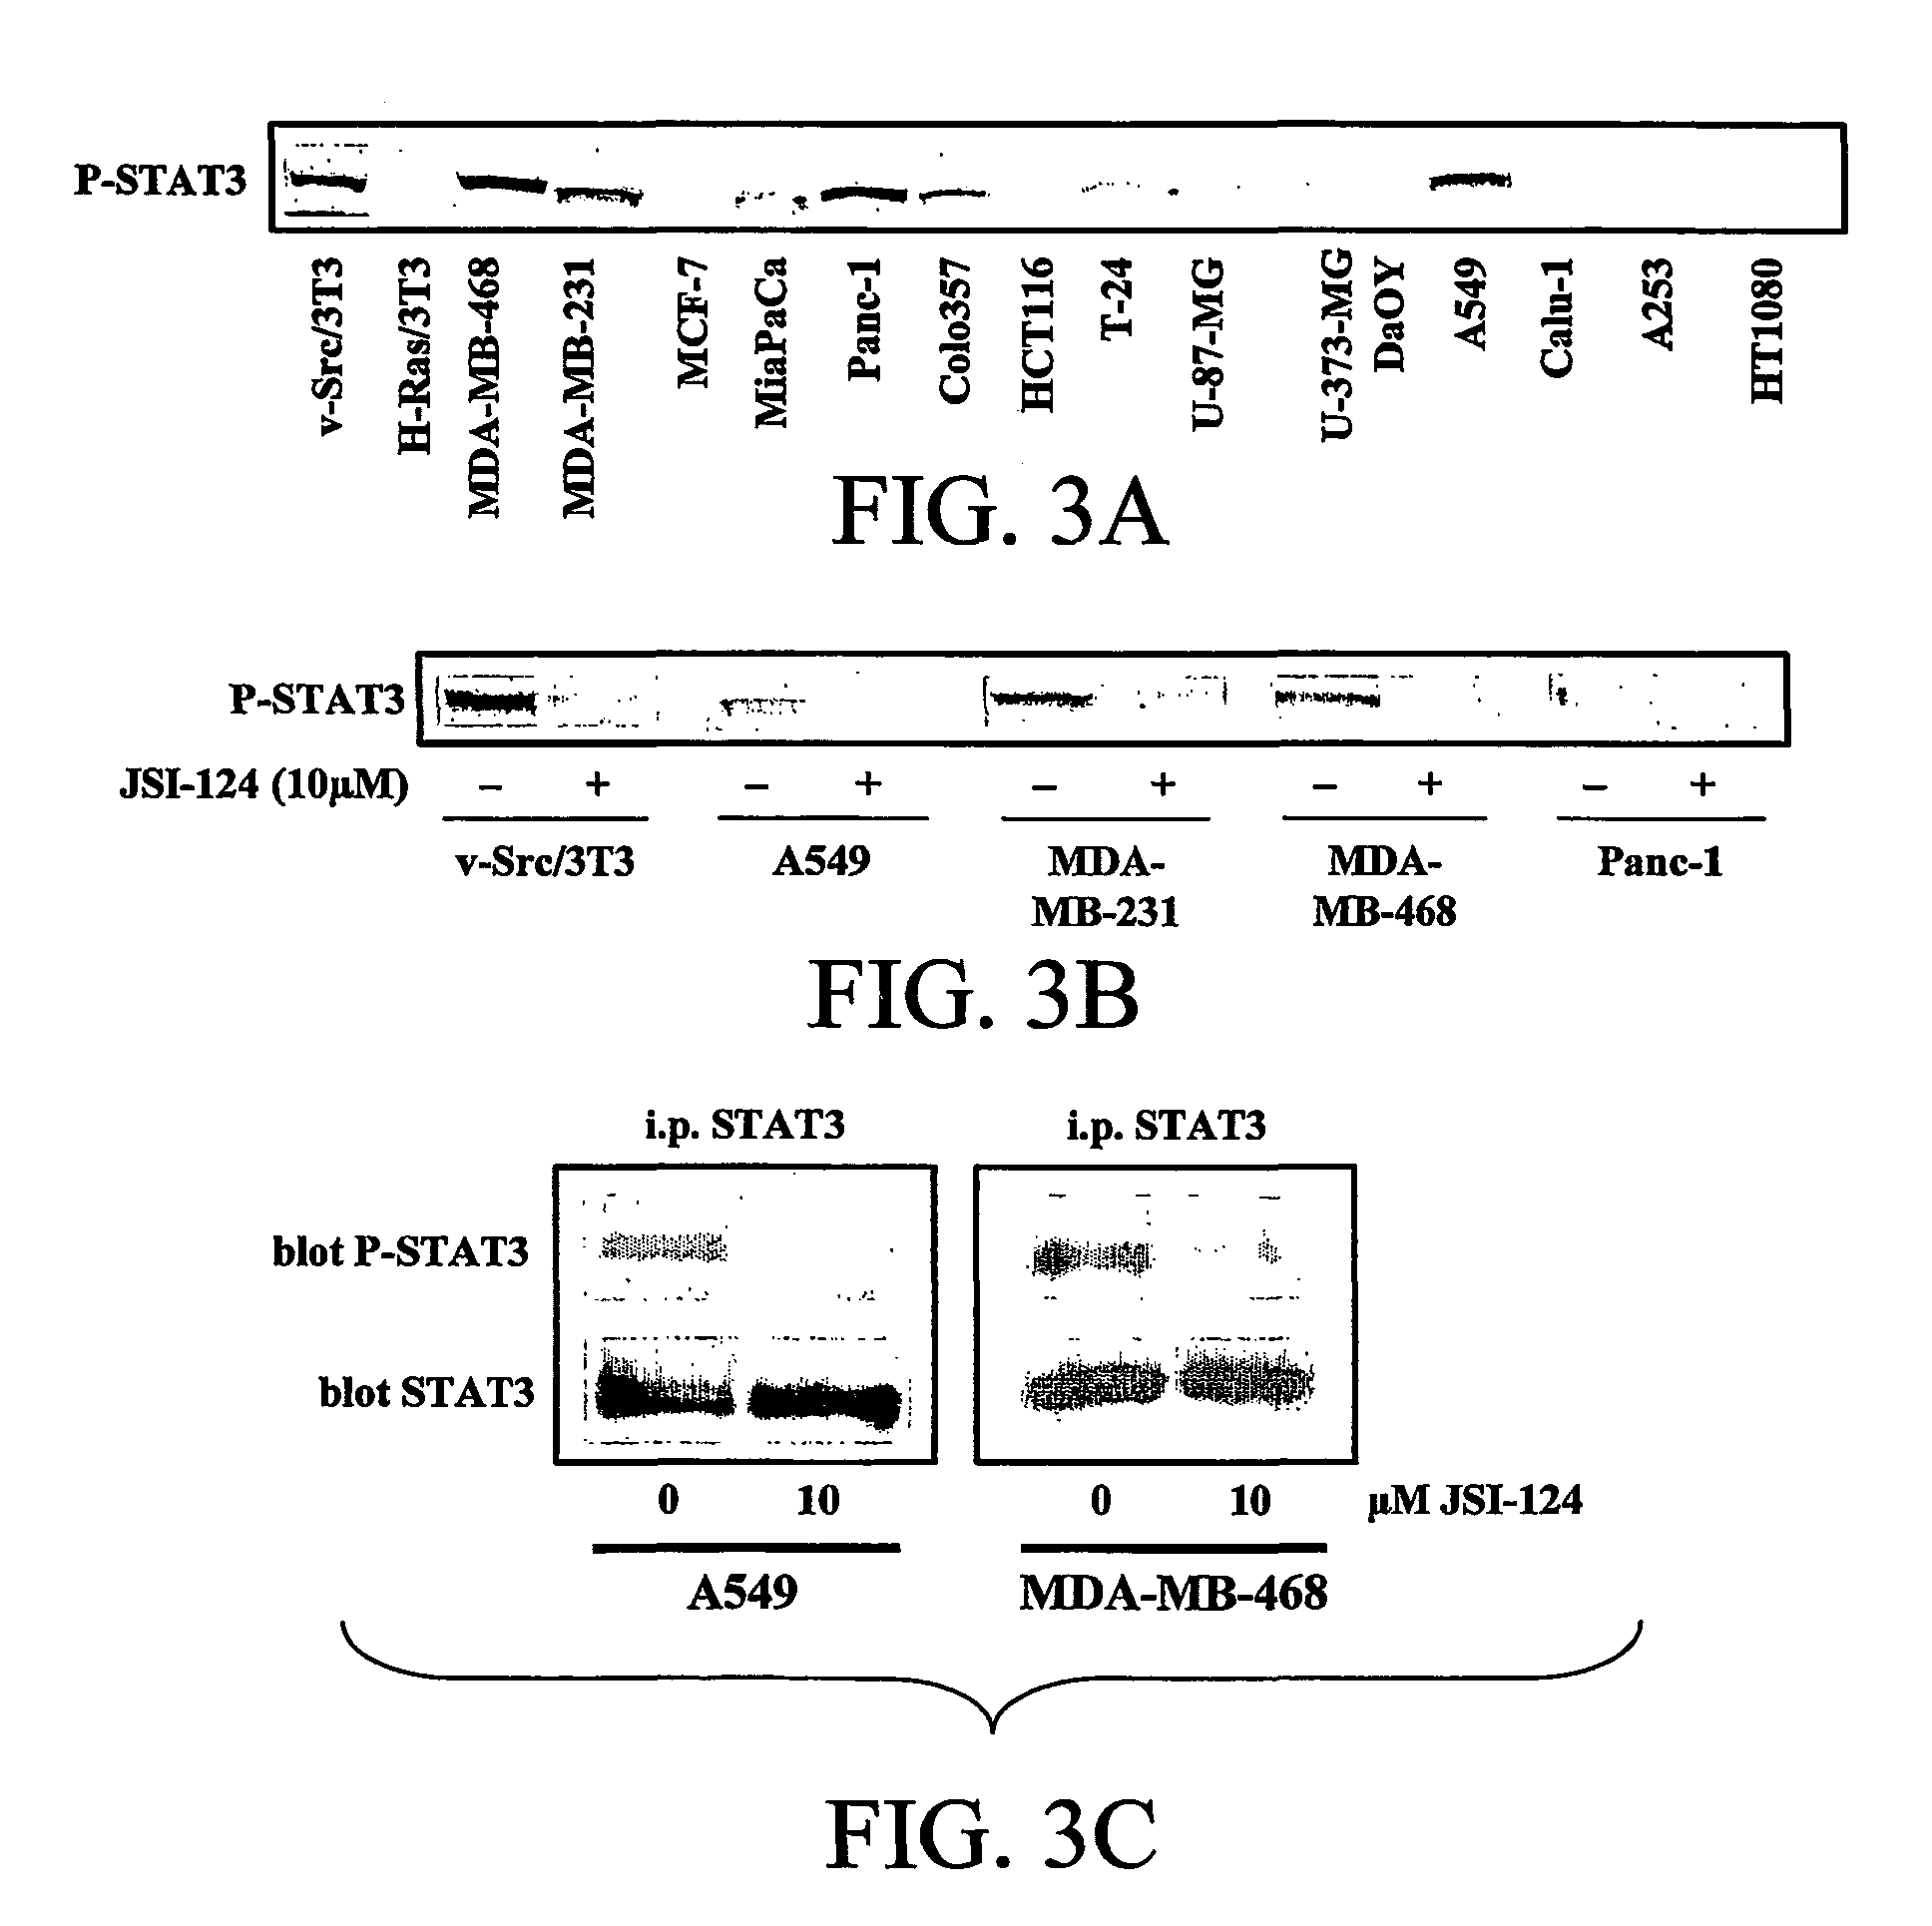 Materials and methods for treatment of cancer and identification of anti-cancer compounds